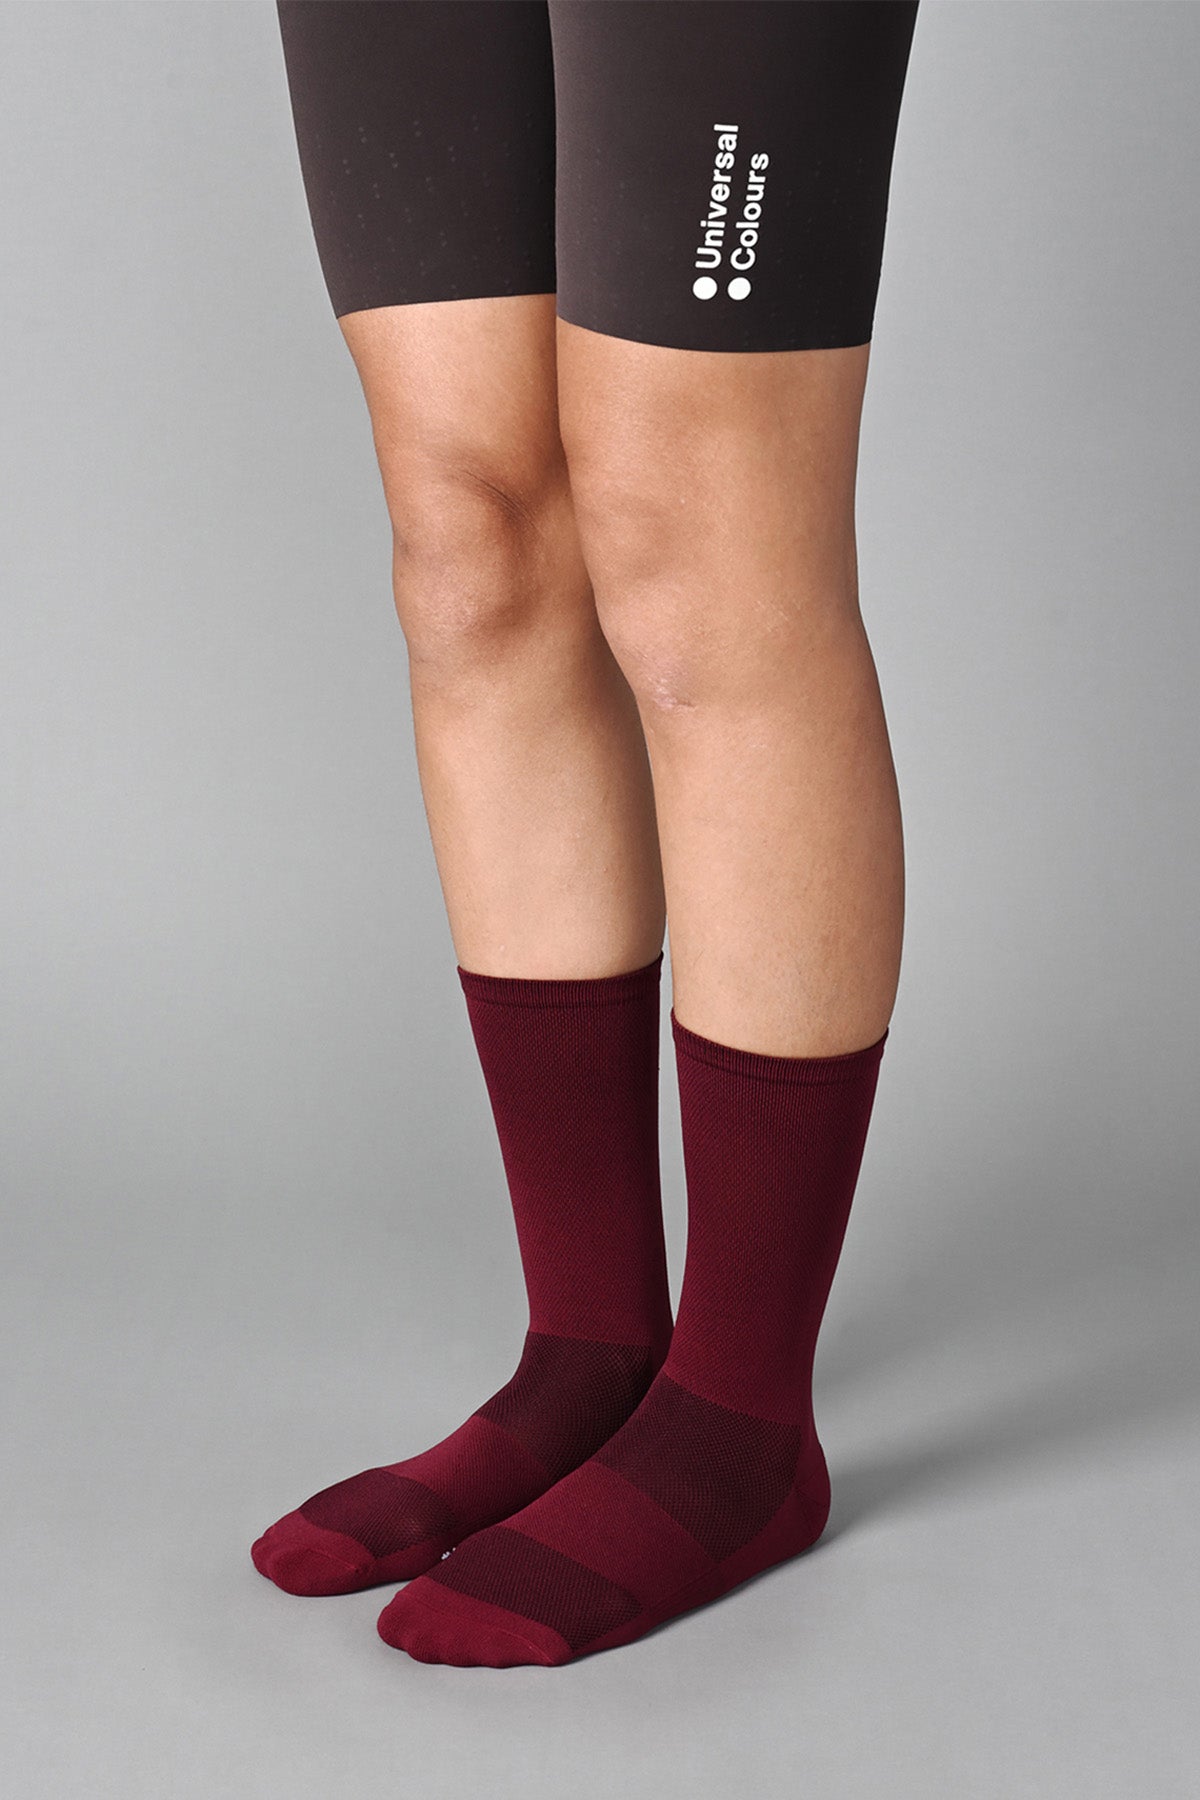 STEALTH - BARN RED FRONT SIDE | BEST CYCLING SOCKS